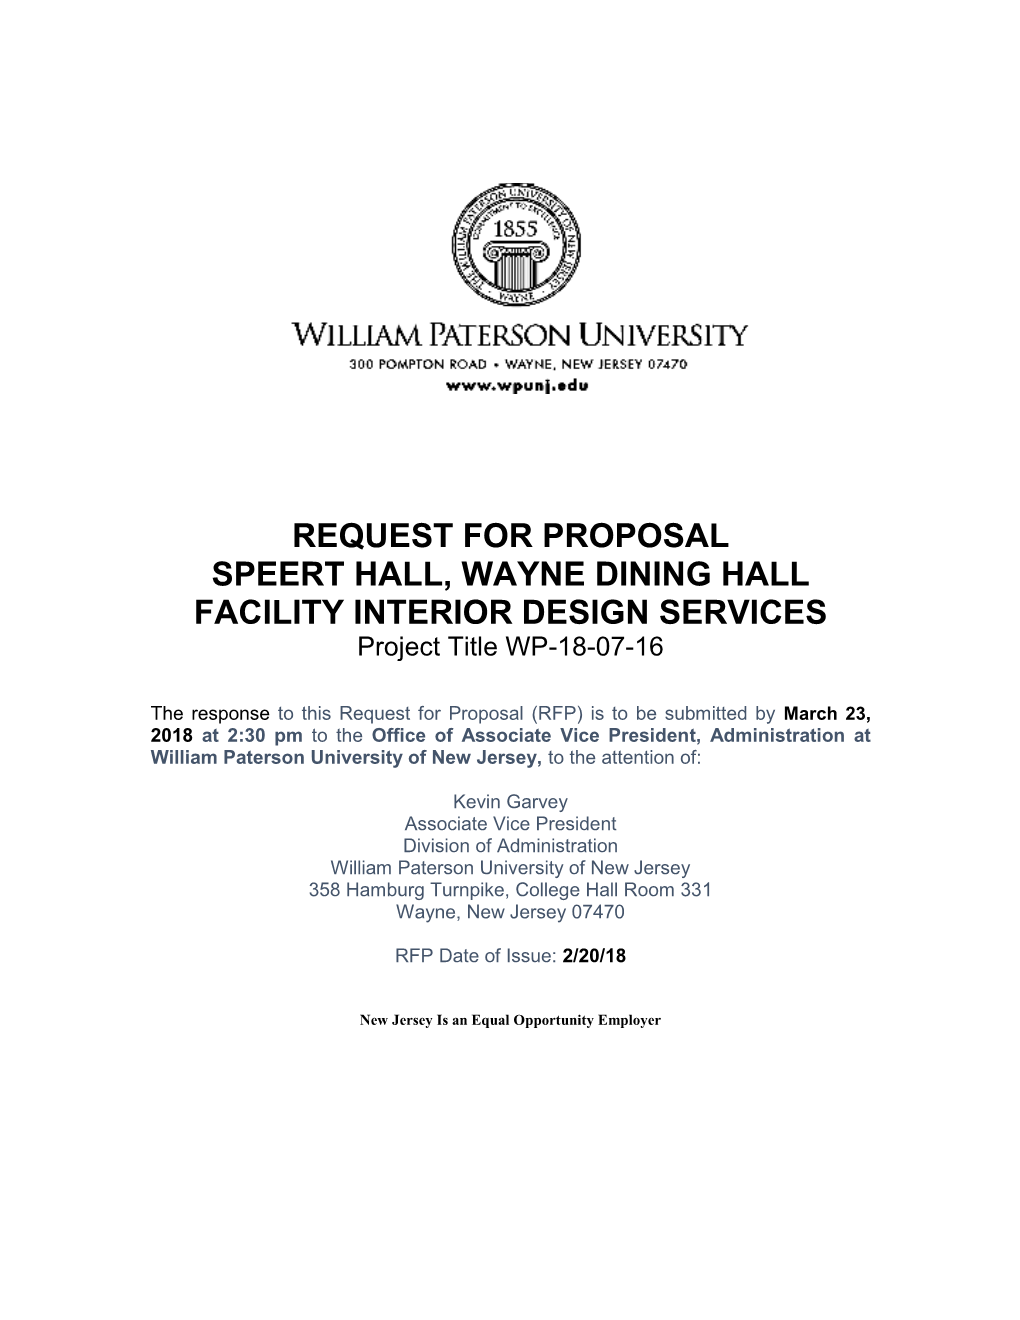 REQUEST for PROPOSAL SPEERT HALL, WAYNE DINING HALL FACILITY INTERIOR DESIGN SERVICES Project Title WP-18-07-16